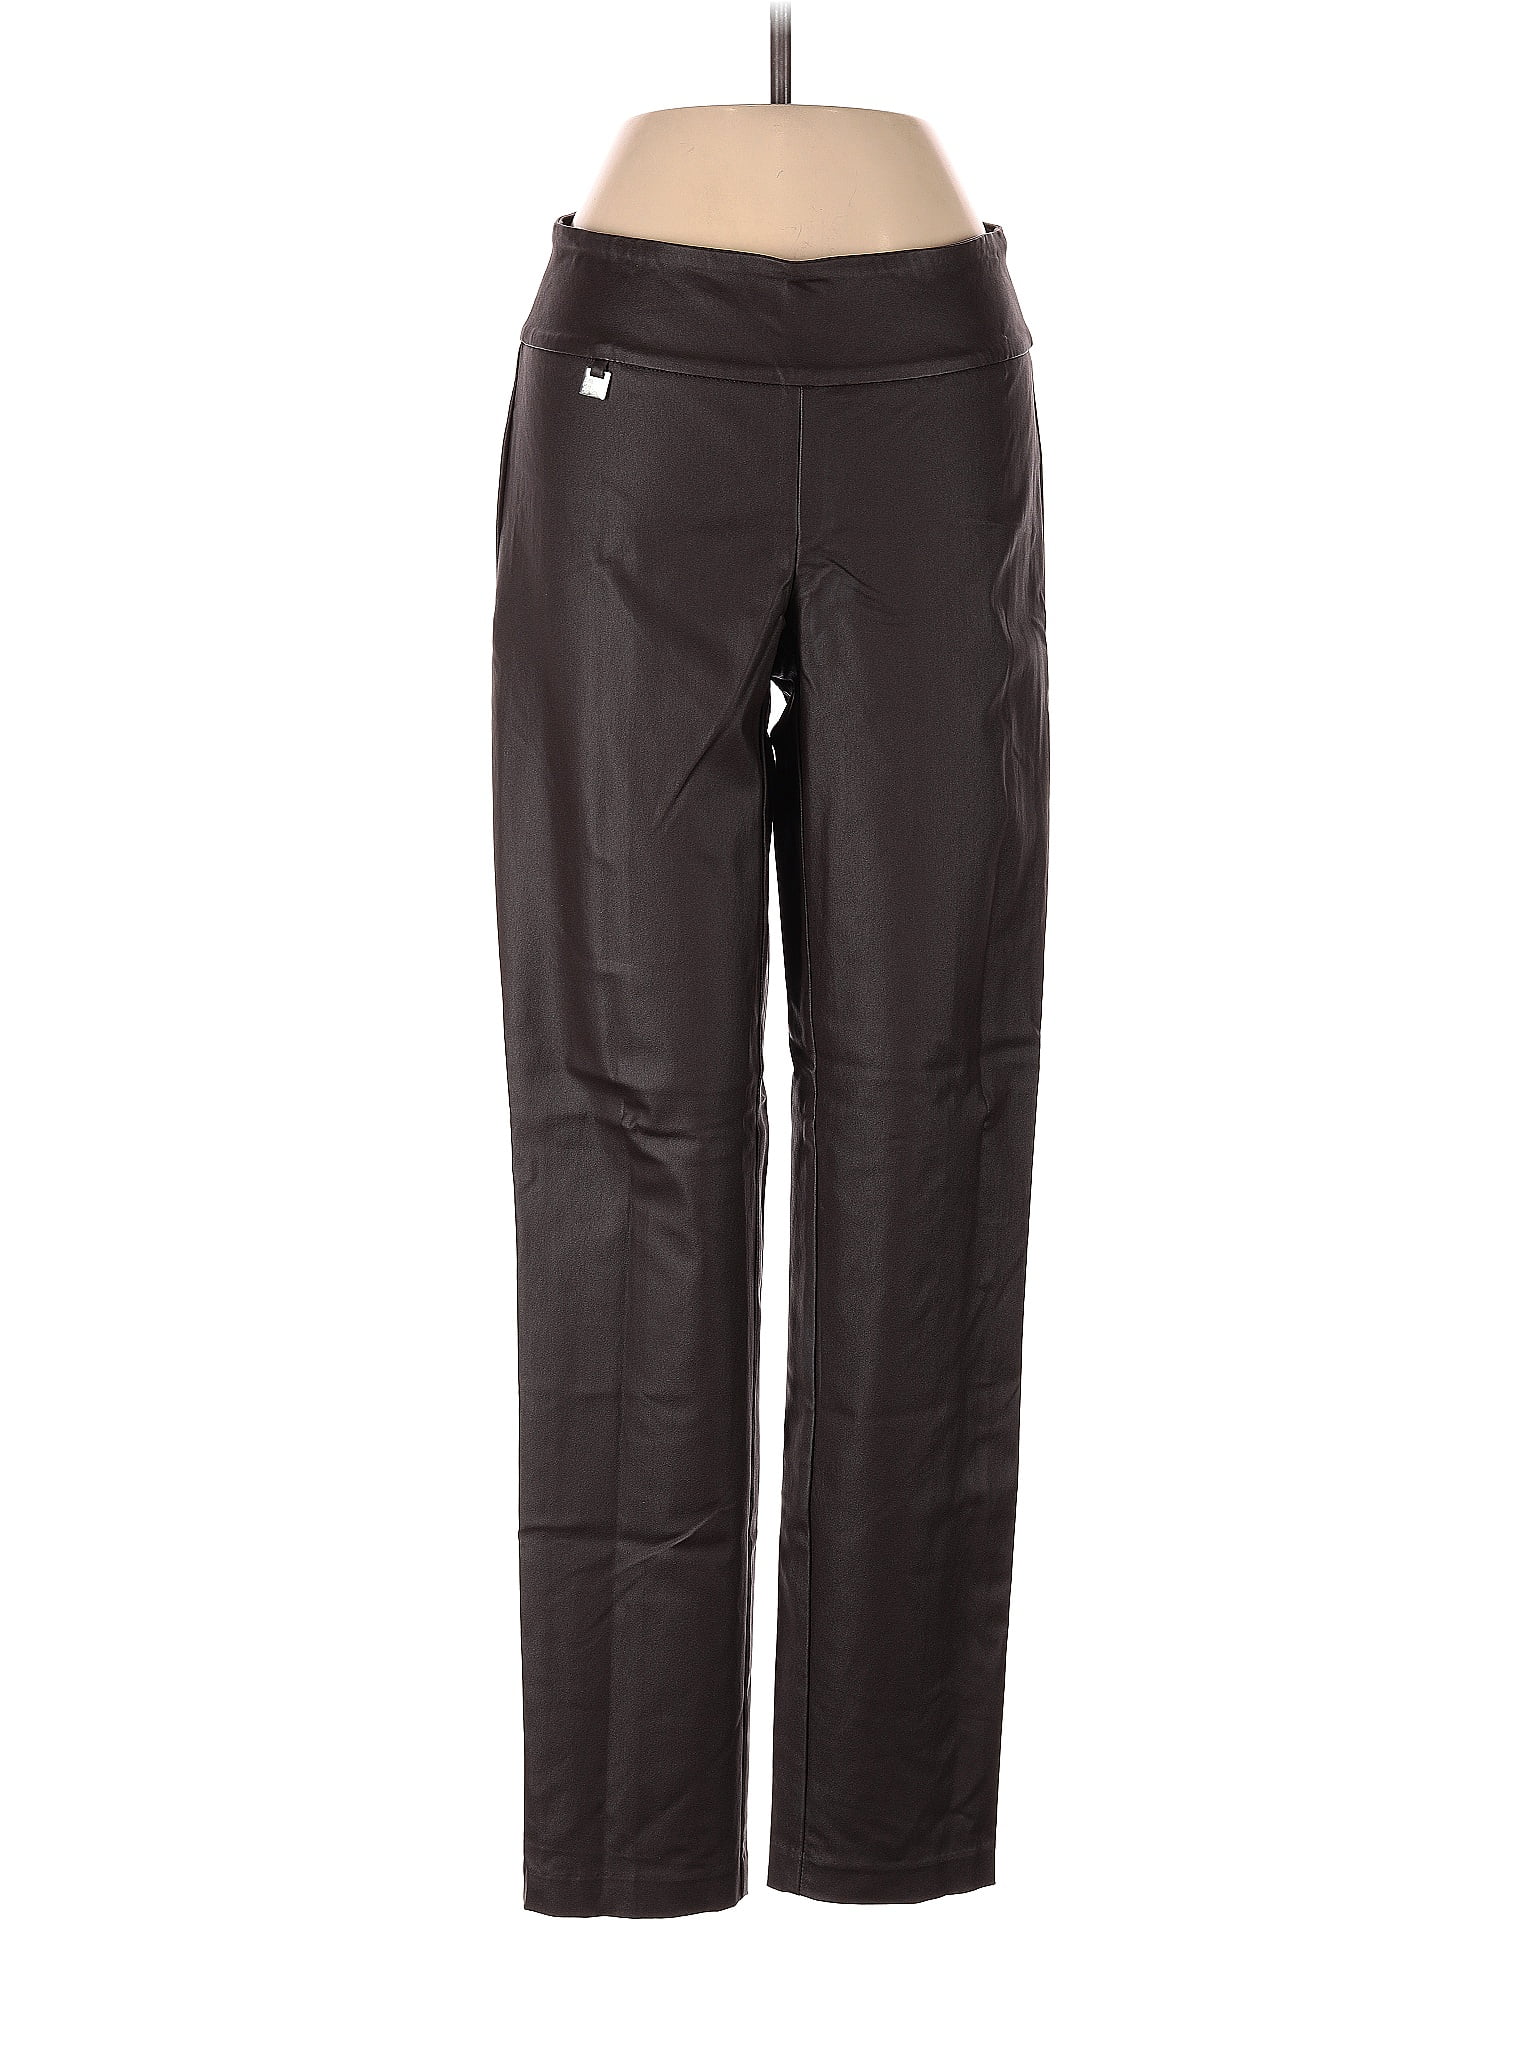 Mossimo Supply Co. Black Sweatpants Size S - 47% off